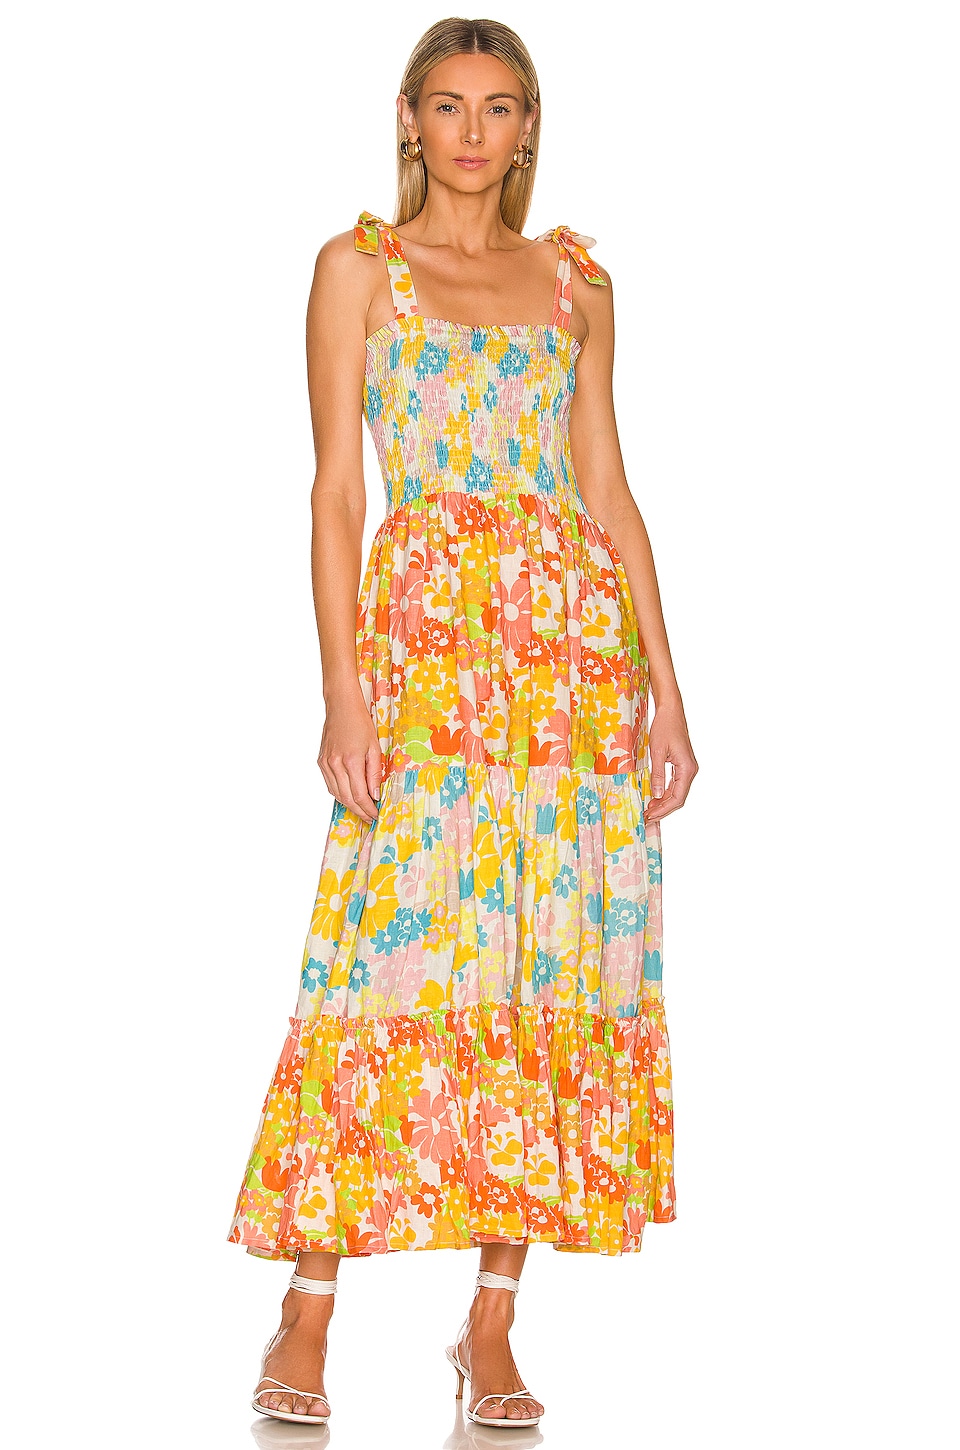 Place Nationale M'langer Dress in Mixed Daisy | REVOLVE